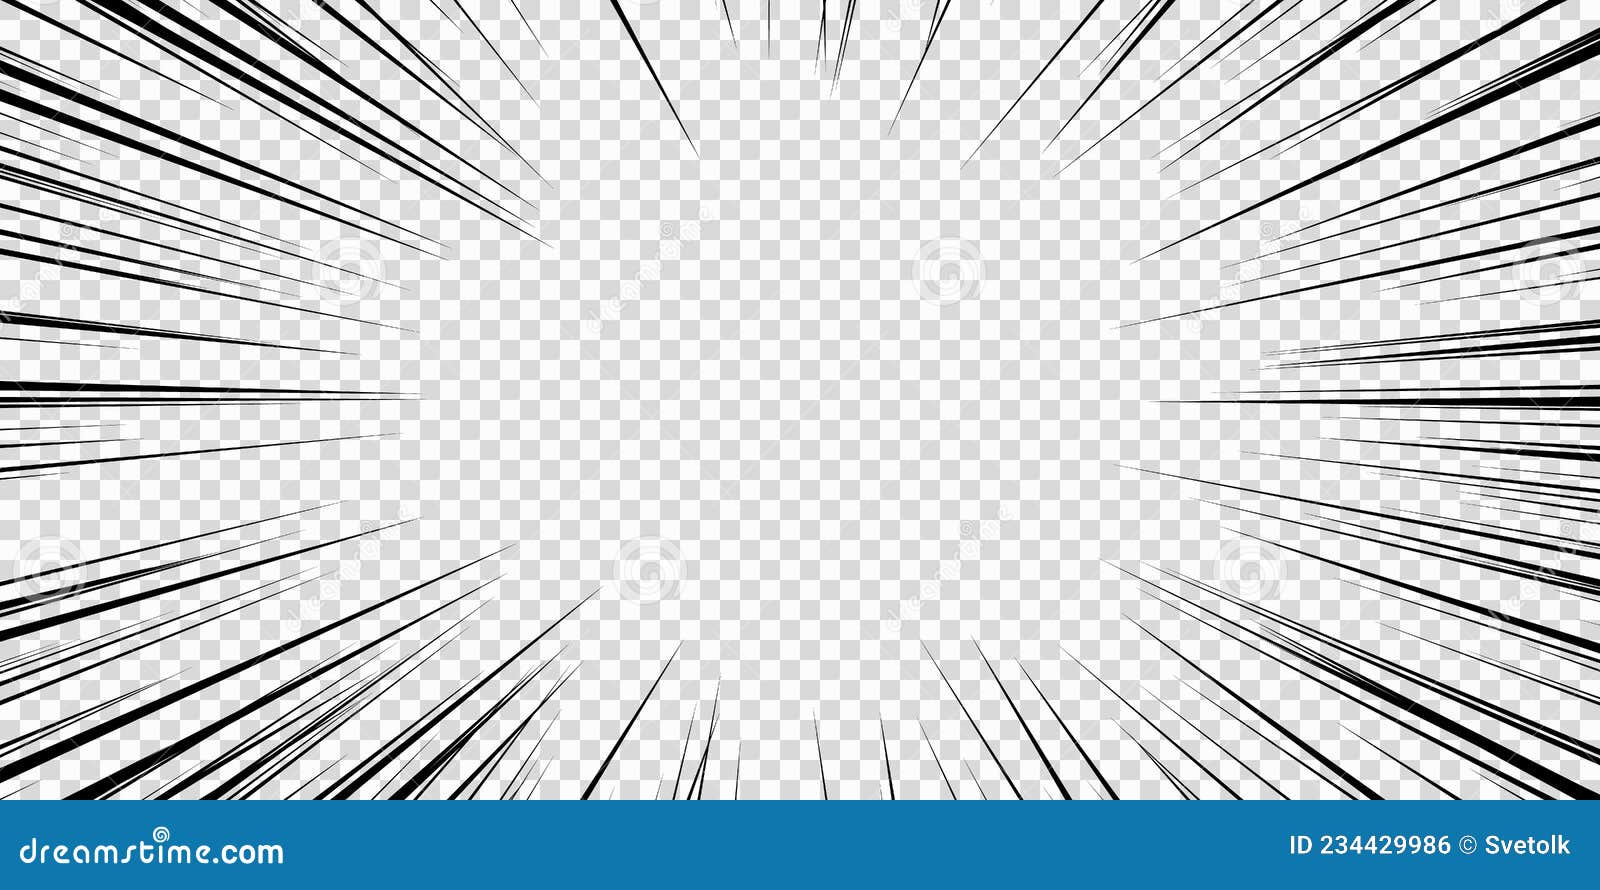 Comic Book Flash Explosion Speed Lines And Action Speed Frame, Comic, Book,  Speed Lines PNG Transparent Image and Clipart for Free Download